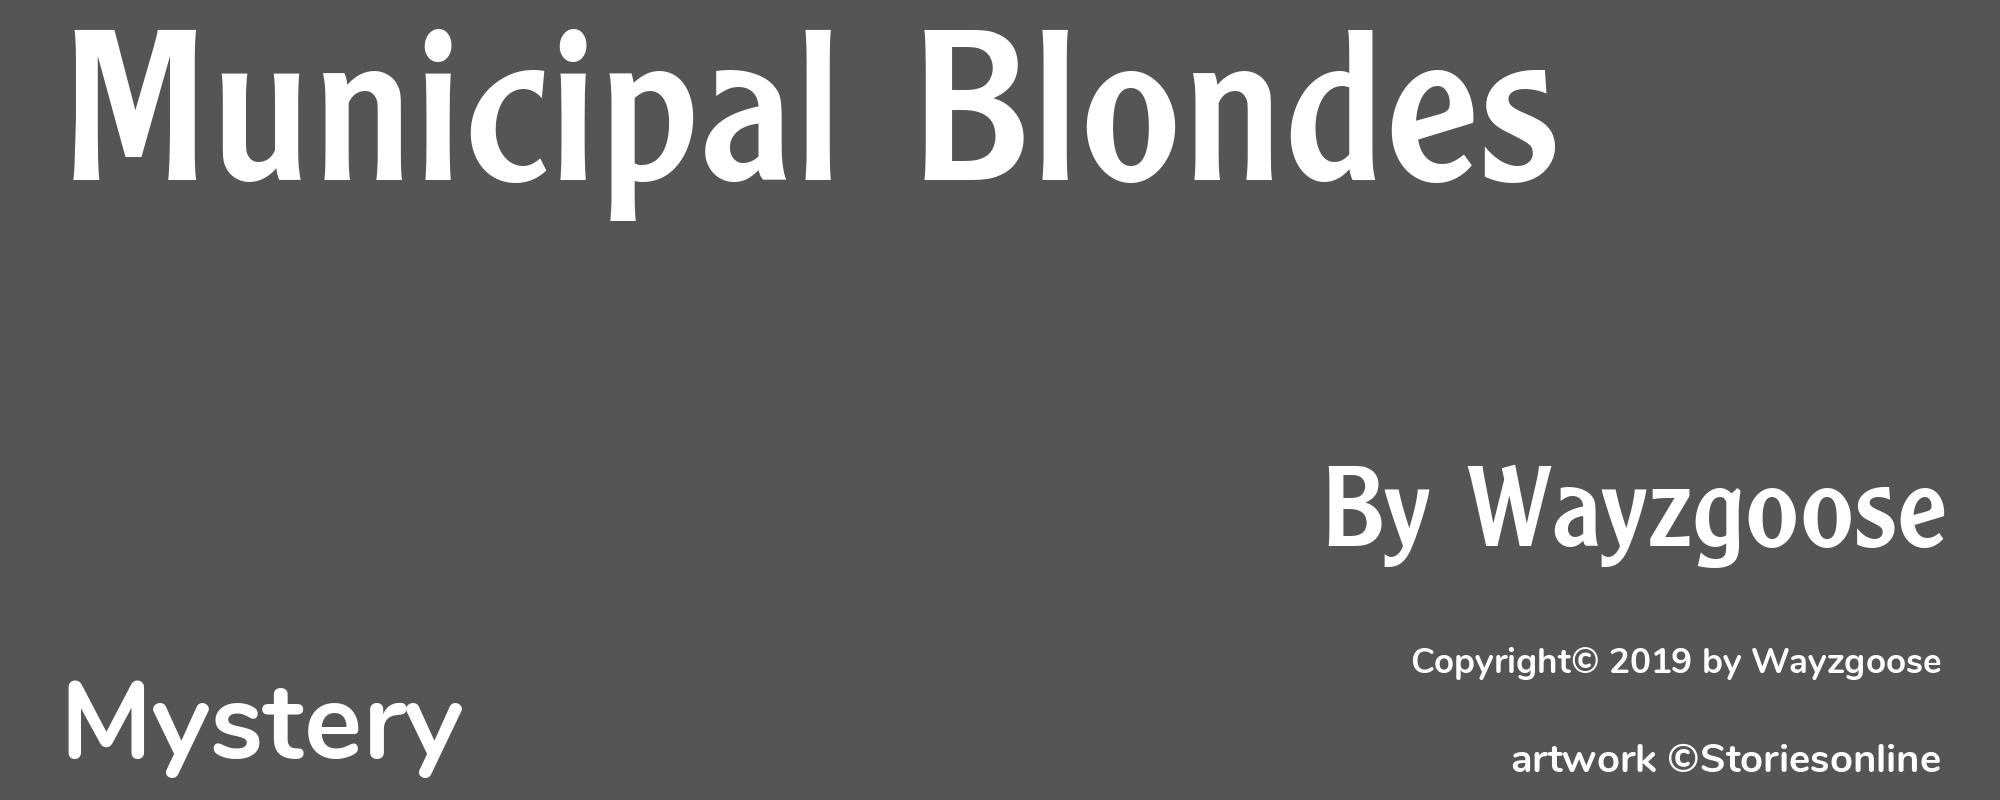 Municipal Blondes - Cover